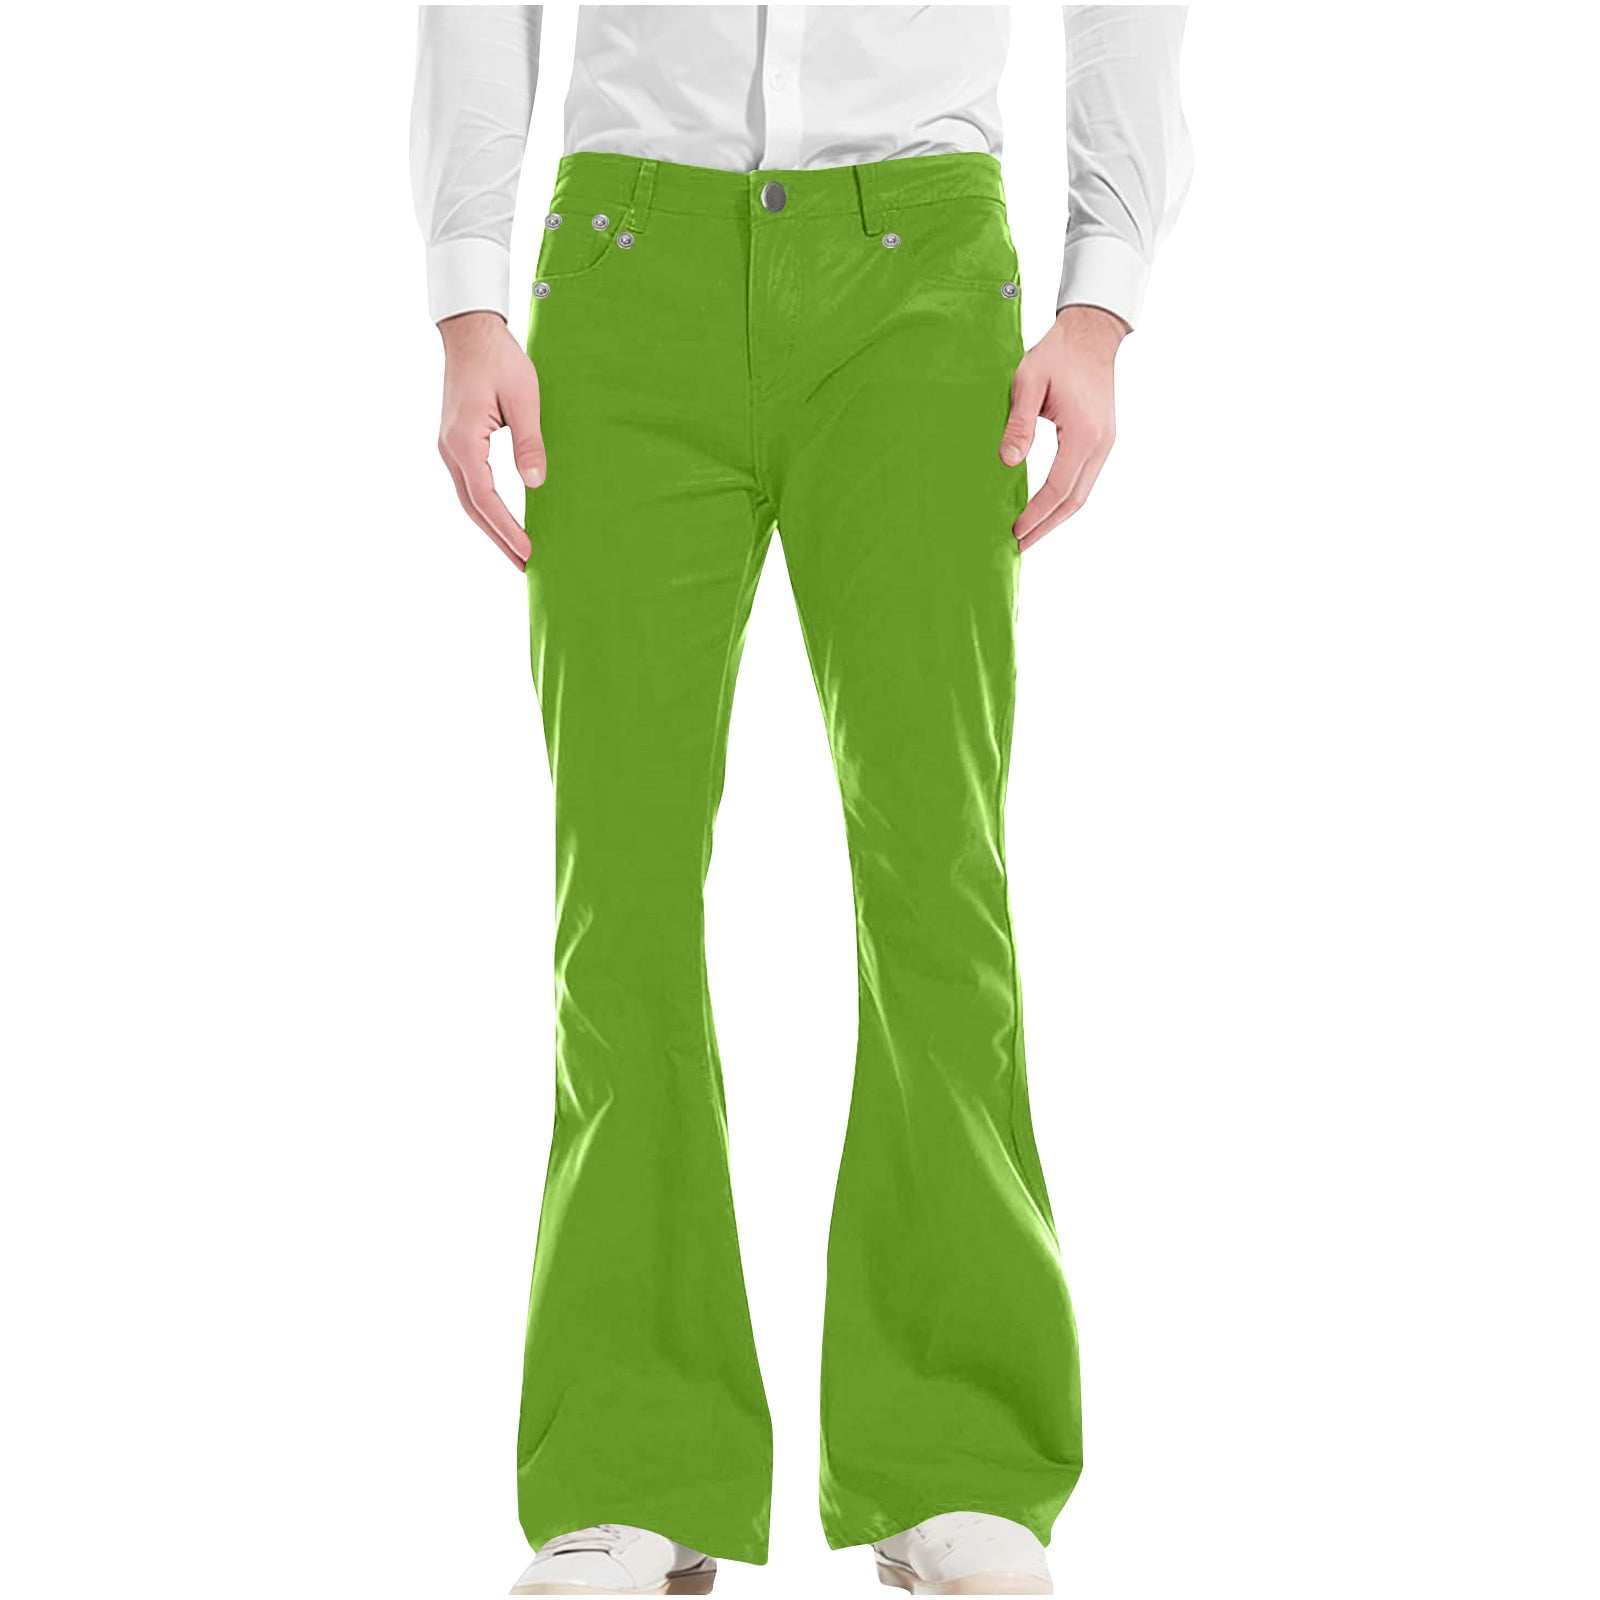 Honeeladyy Men's Relaxed Vintage 60s 70s Bell Bottom Pants Stretch Fit  Classic Comfort Flared Flares Retro Disco Pants Mens Linen Pants